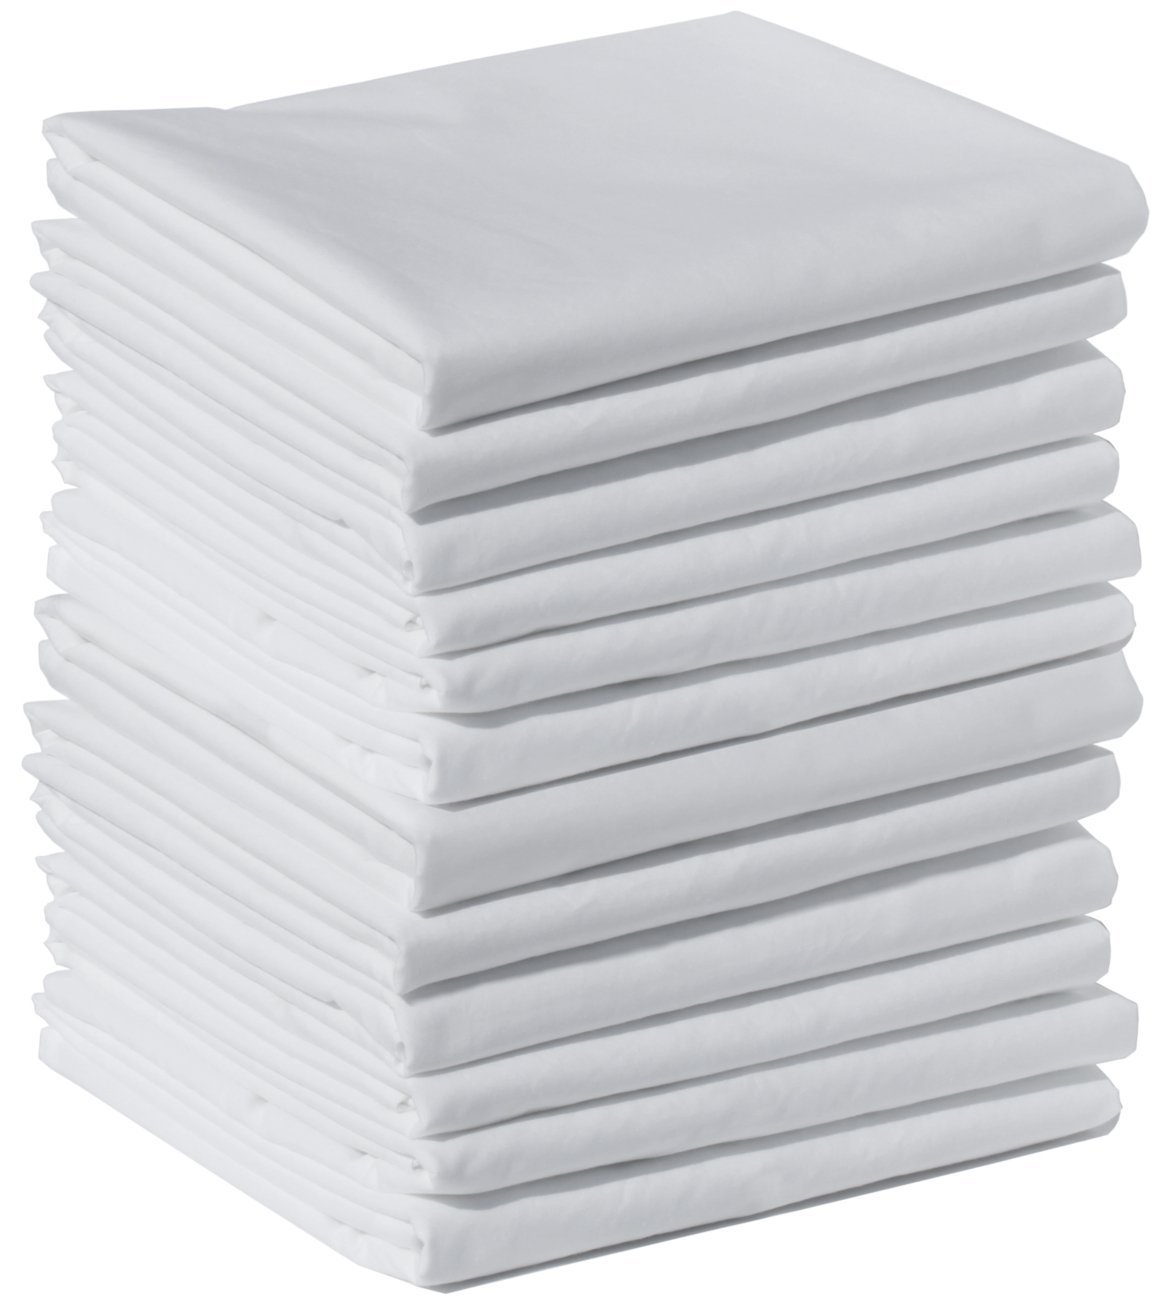 Polycotton Bulk Pack of 12 Queen Size Pillowcases, 200 Thread Count, White Queen - $52.95